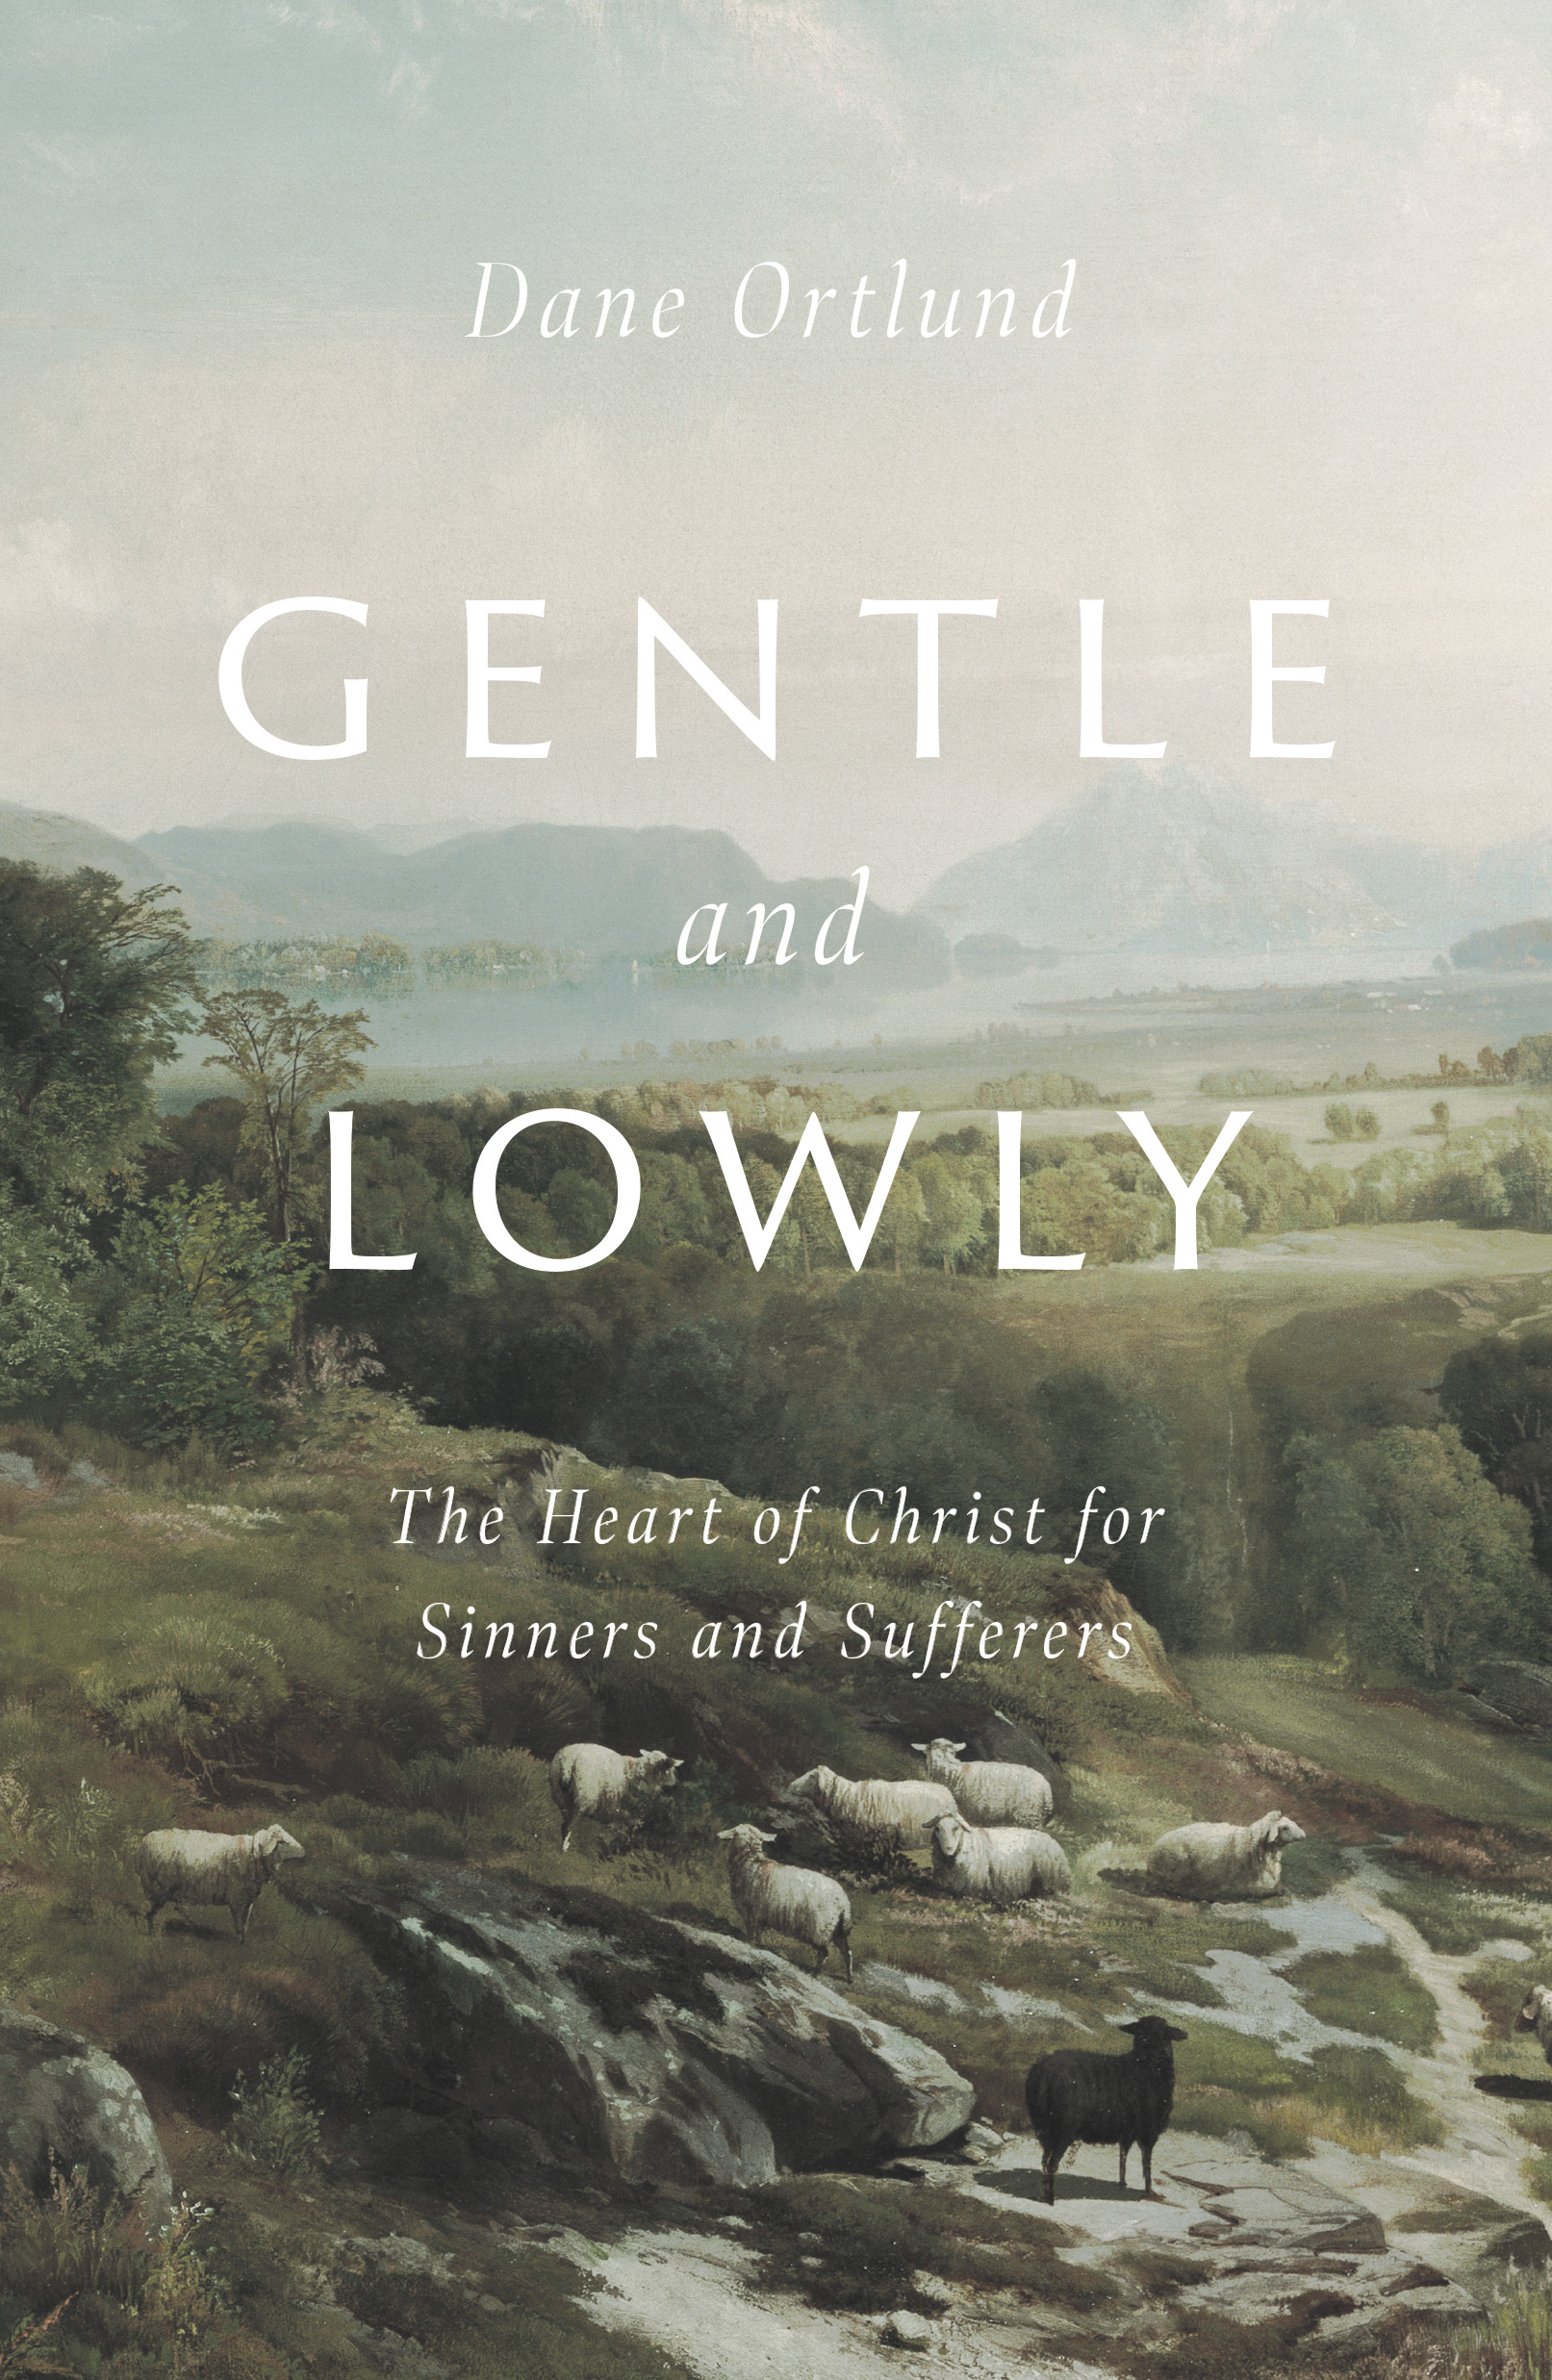 Gentle and Lowly - The Heart of Christ for Sinners and Sufferers